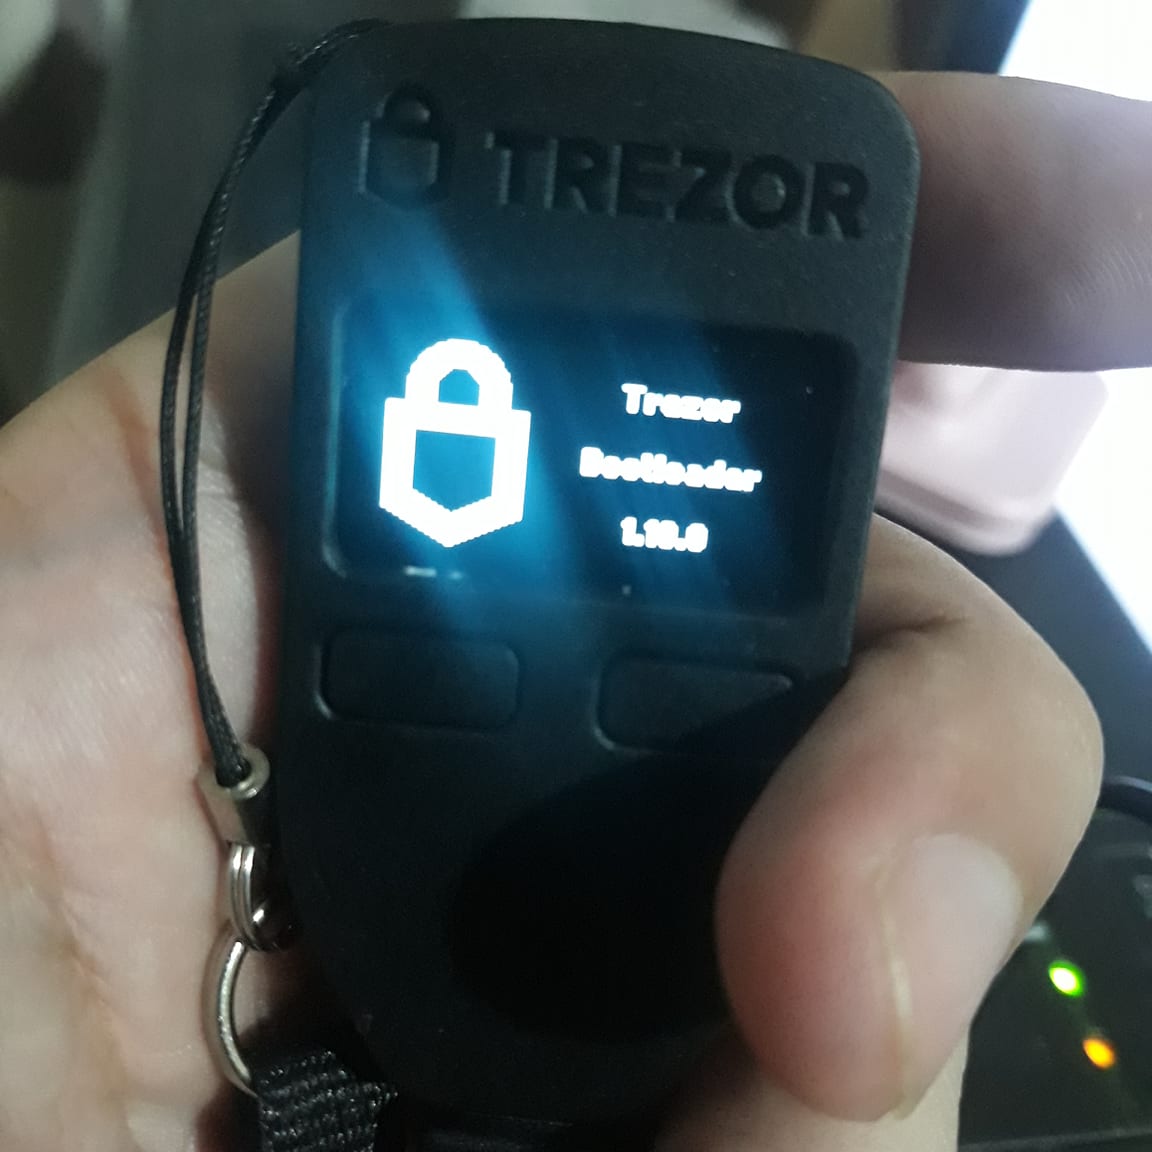 Why isn't my Trezor connecting to my computer?